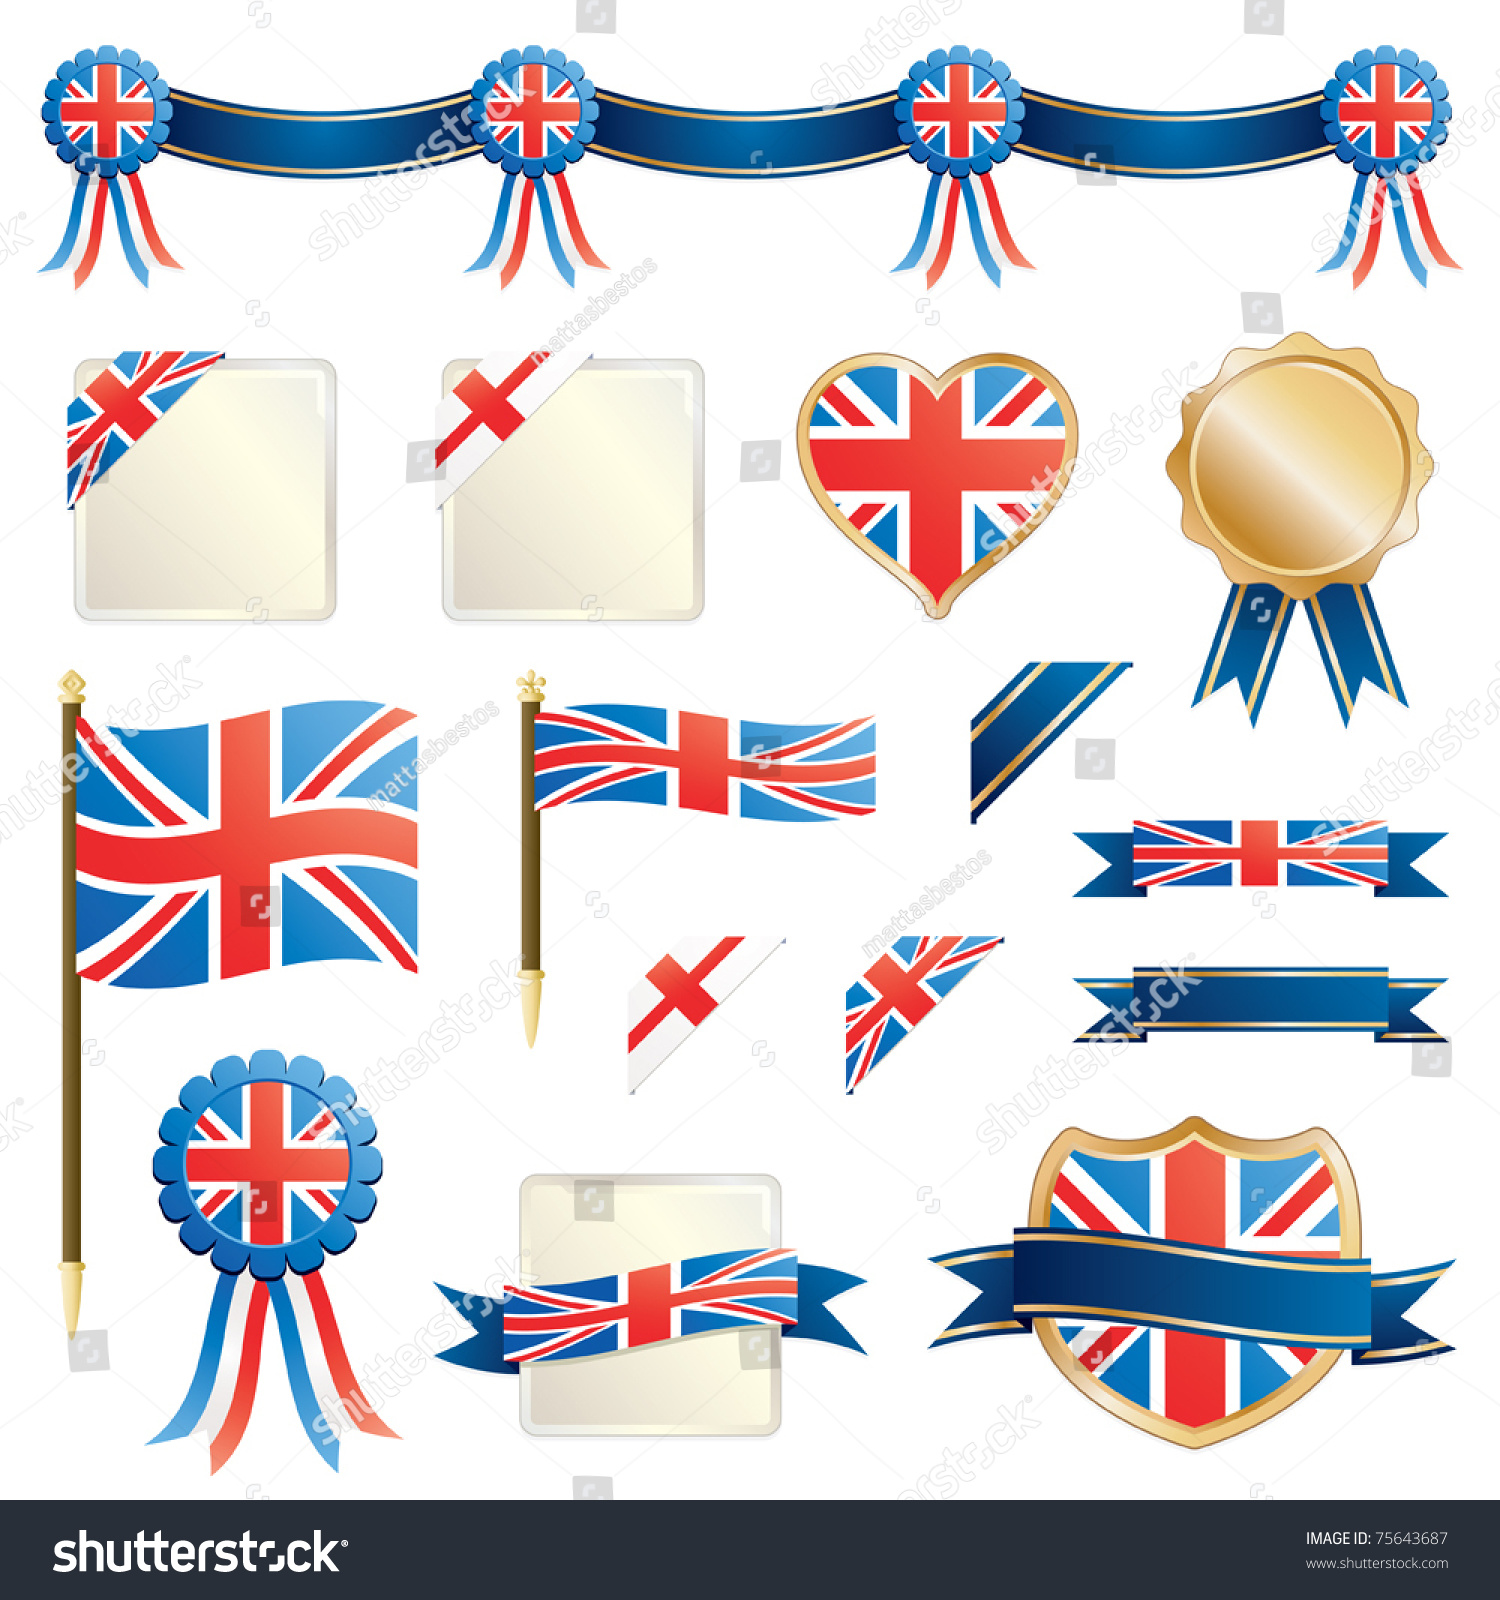 SVG of united kingdom decorative ribbons, flags and seals isolated on white svg